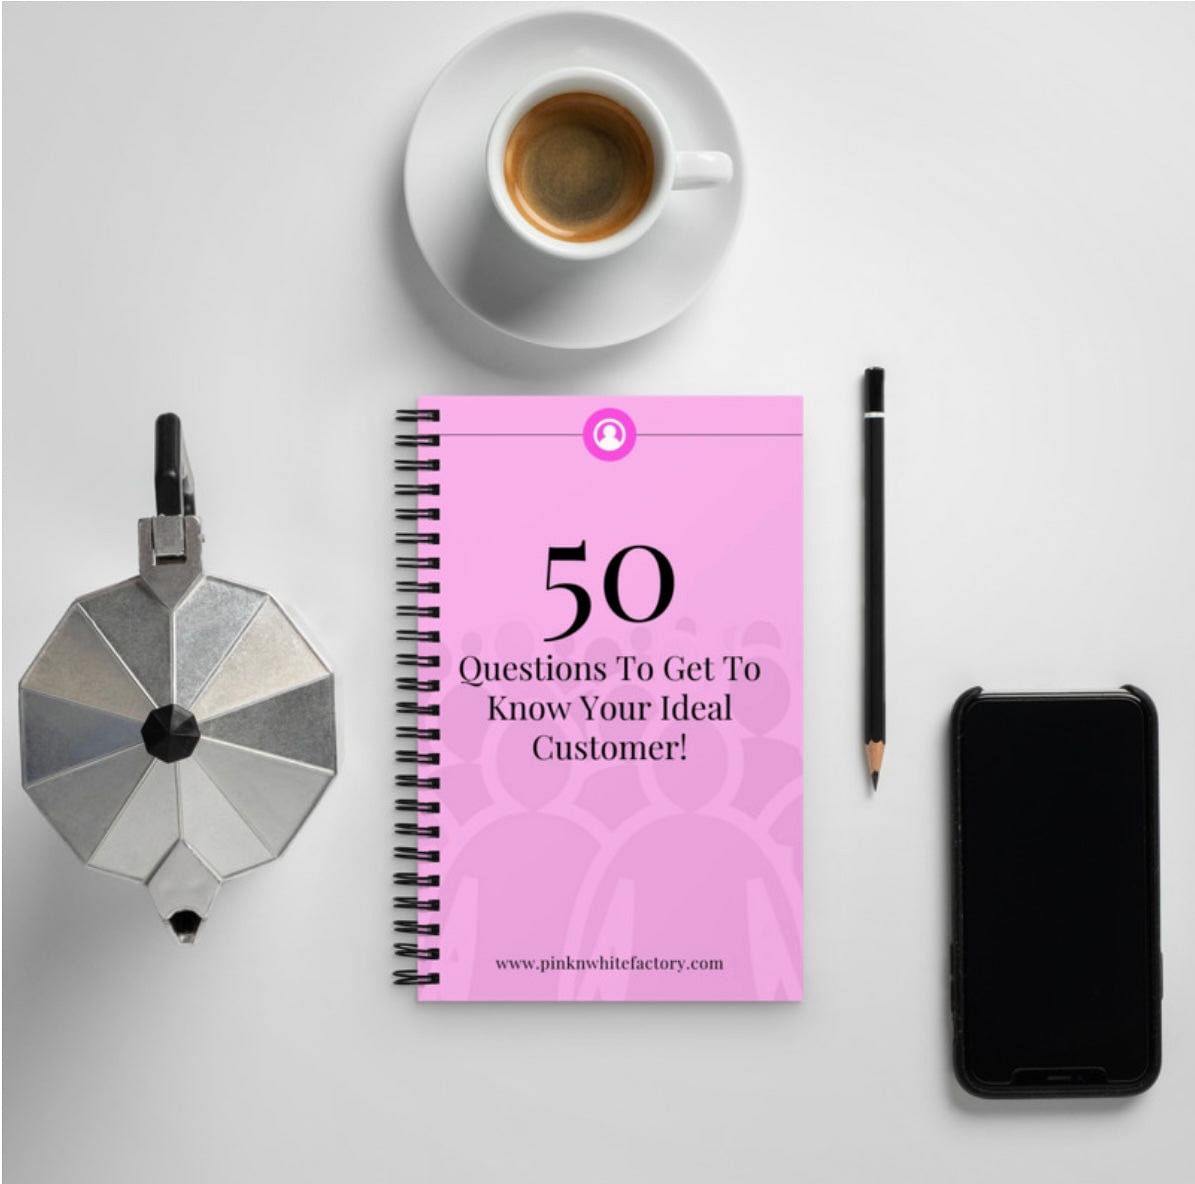 50 Questions To Get To Know Your Ideal Customer - 17 page planner - Pink N White Factory